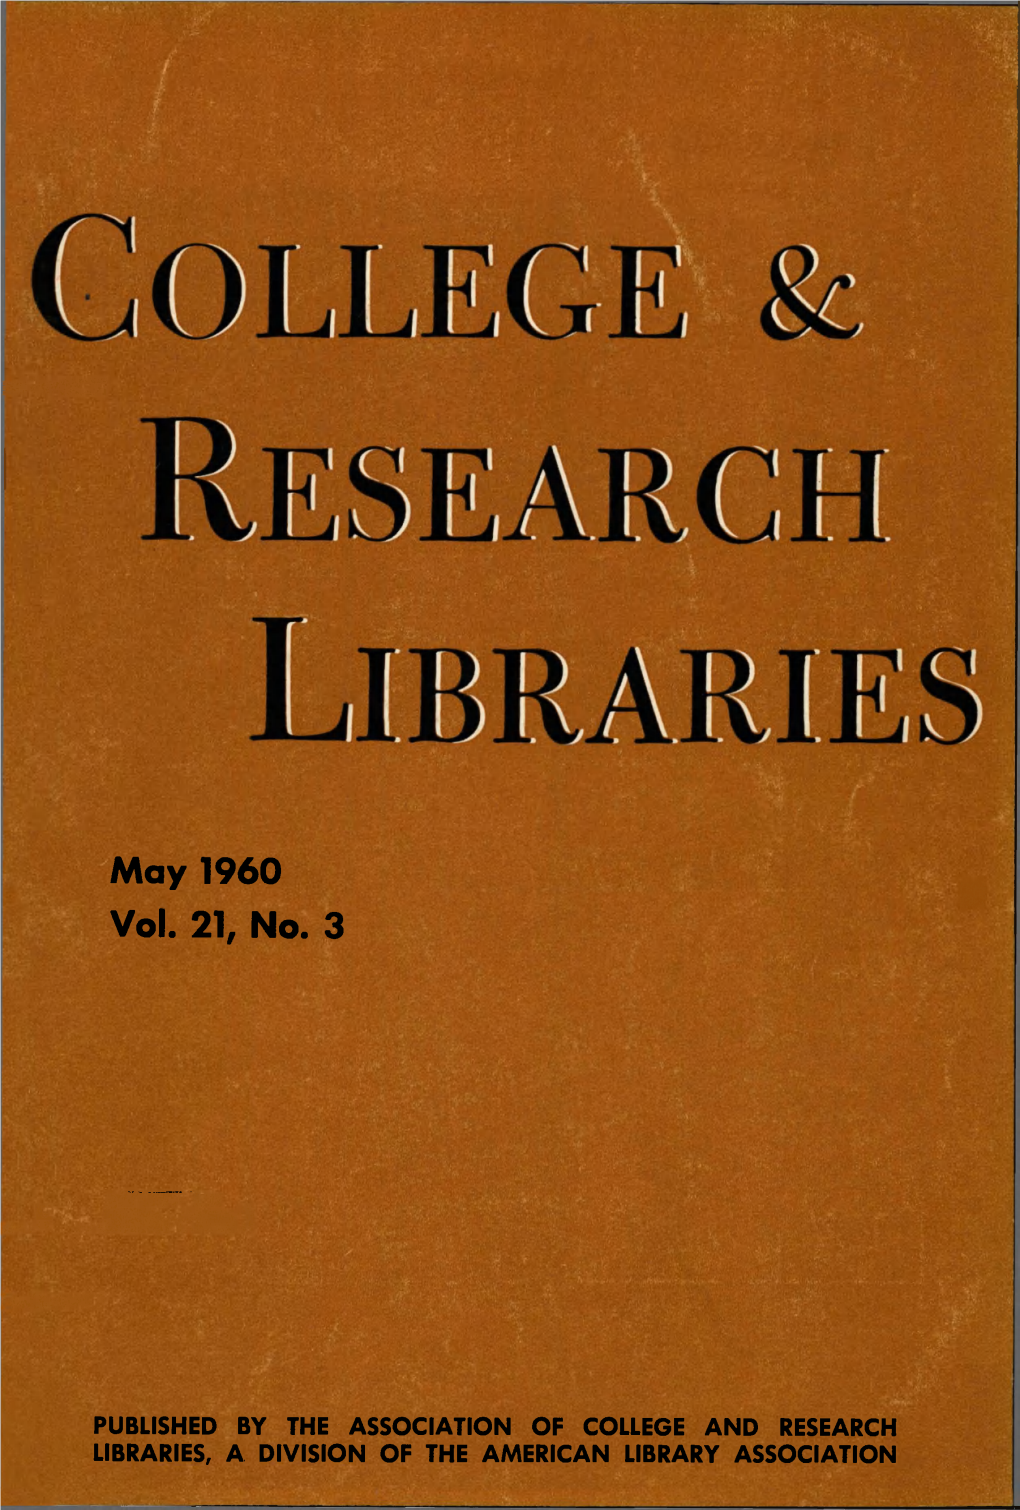 COLLEGE and RESEARCH LIBRARIES, a DIVISION of the AMERICAN LIBRARY ASSOCIATION Sop^Tioni